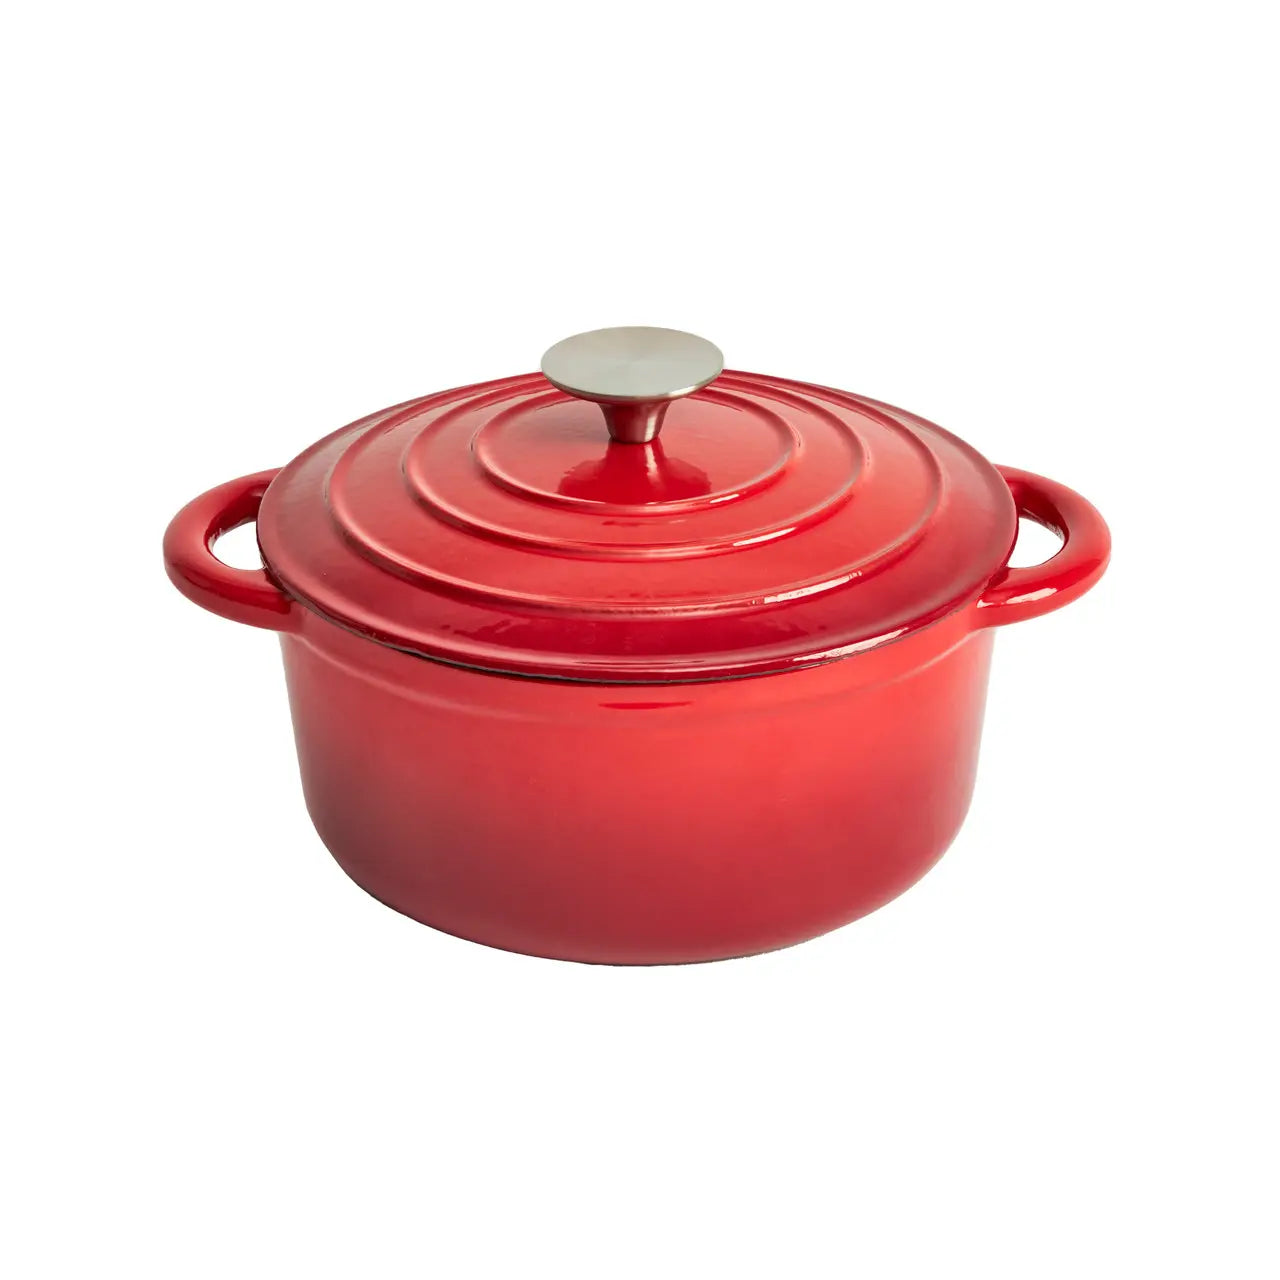 Enameled Cast Iron 8 1/4 inch Round Dutch Oven in Red